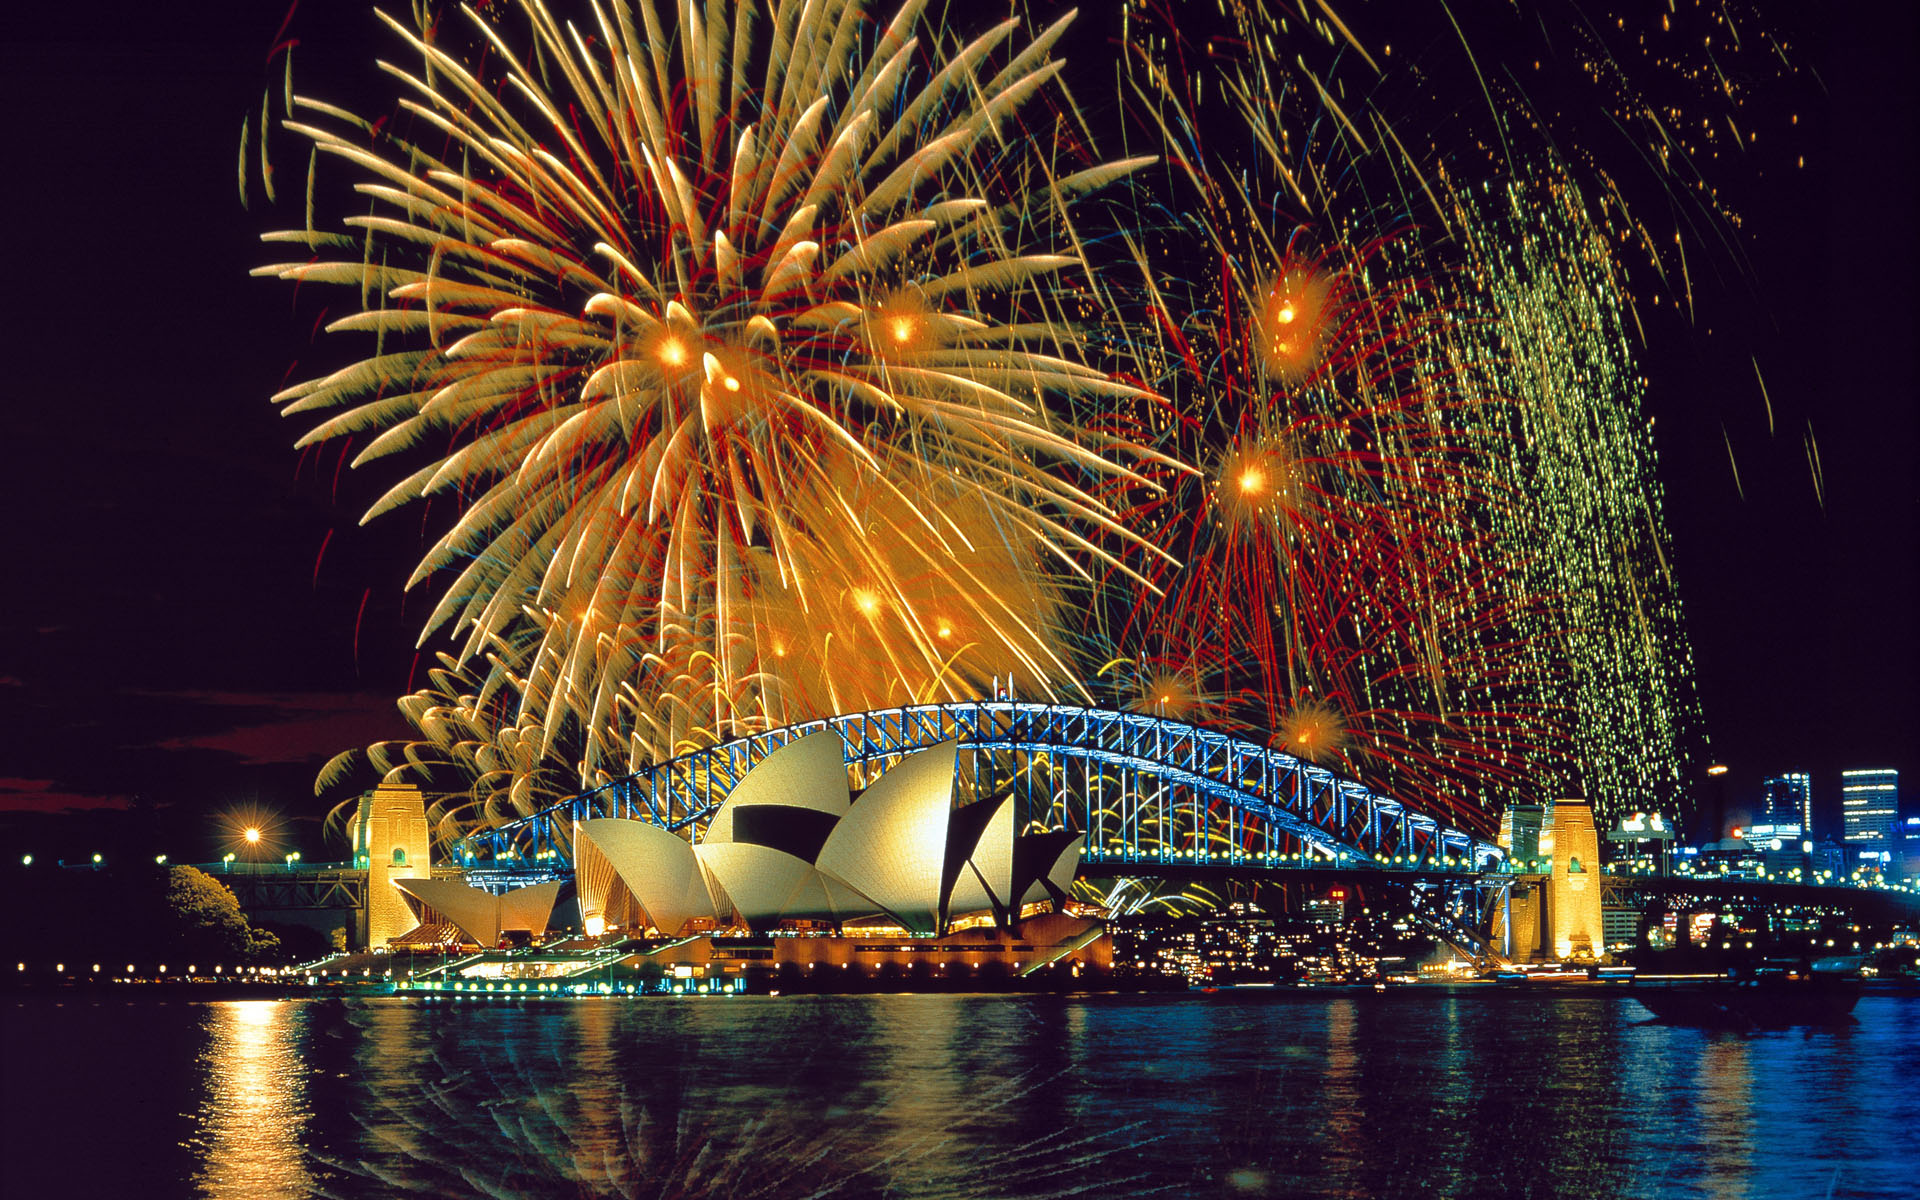 HD Wallpapers Fireworks over the Sydney Opera House and Harbor Bridge